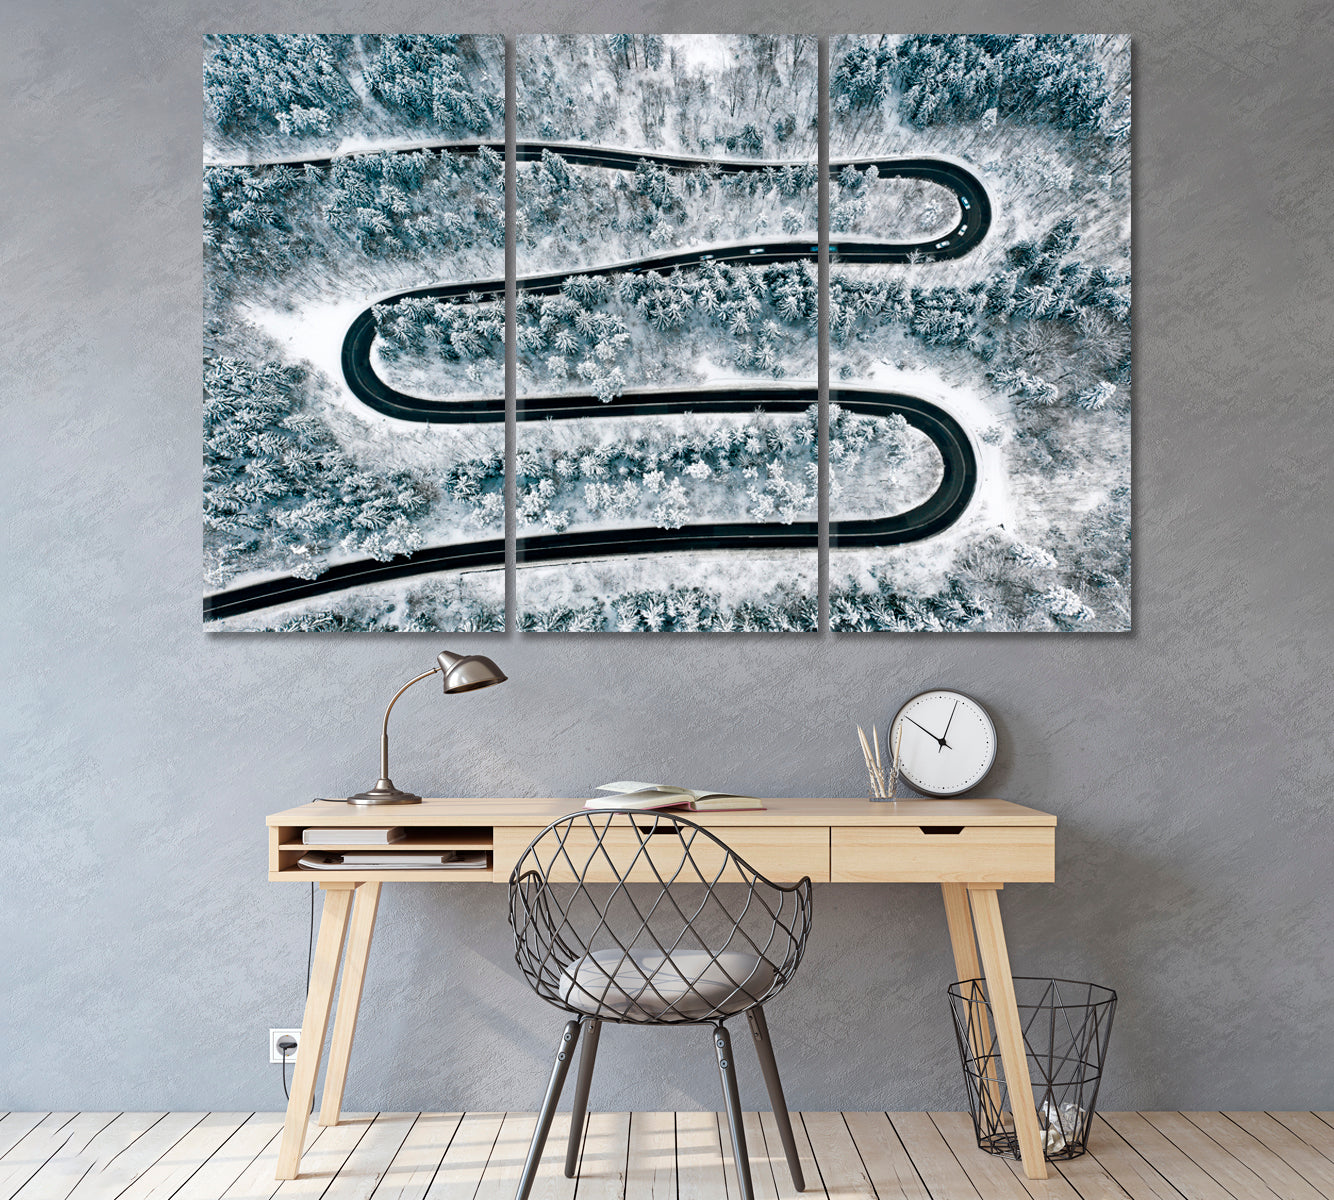 Winding Road in Winter Forest Canvas Print ArtLexy 3 Panels 36"x24" inches 